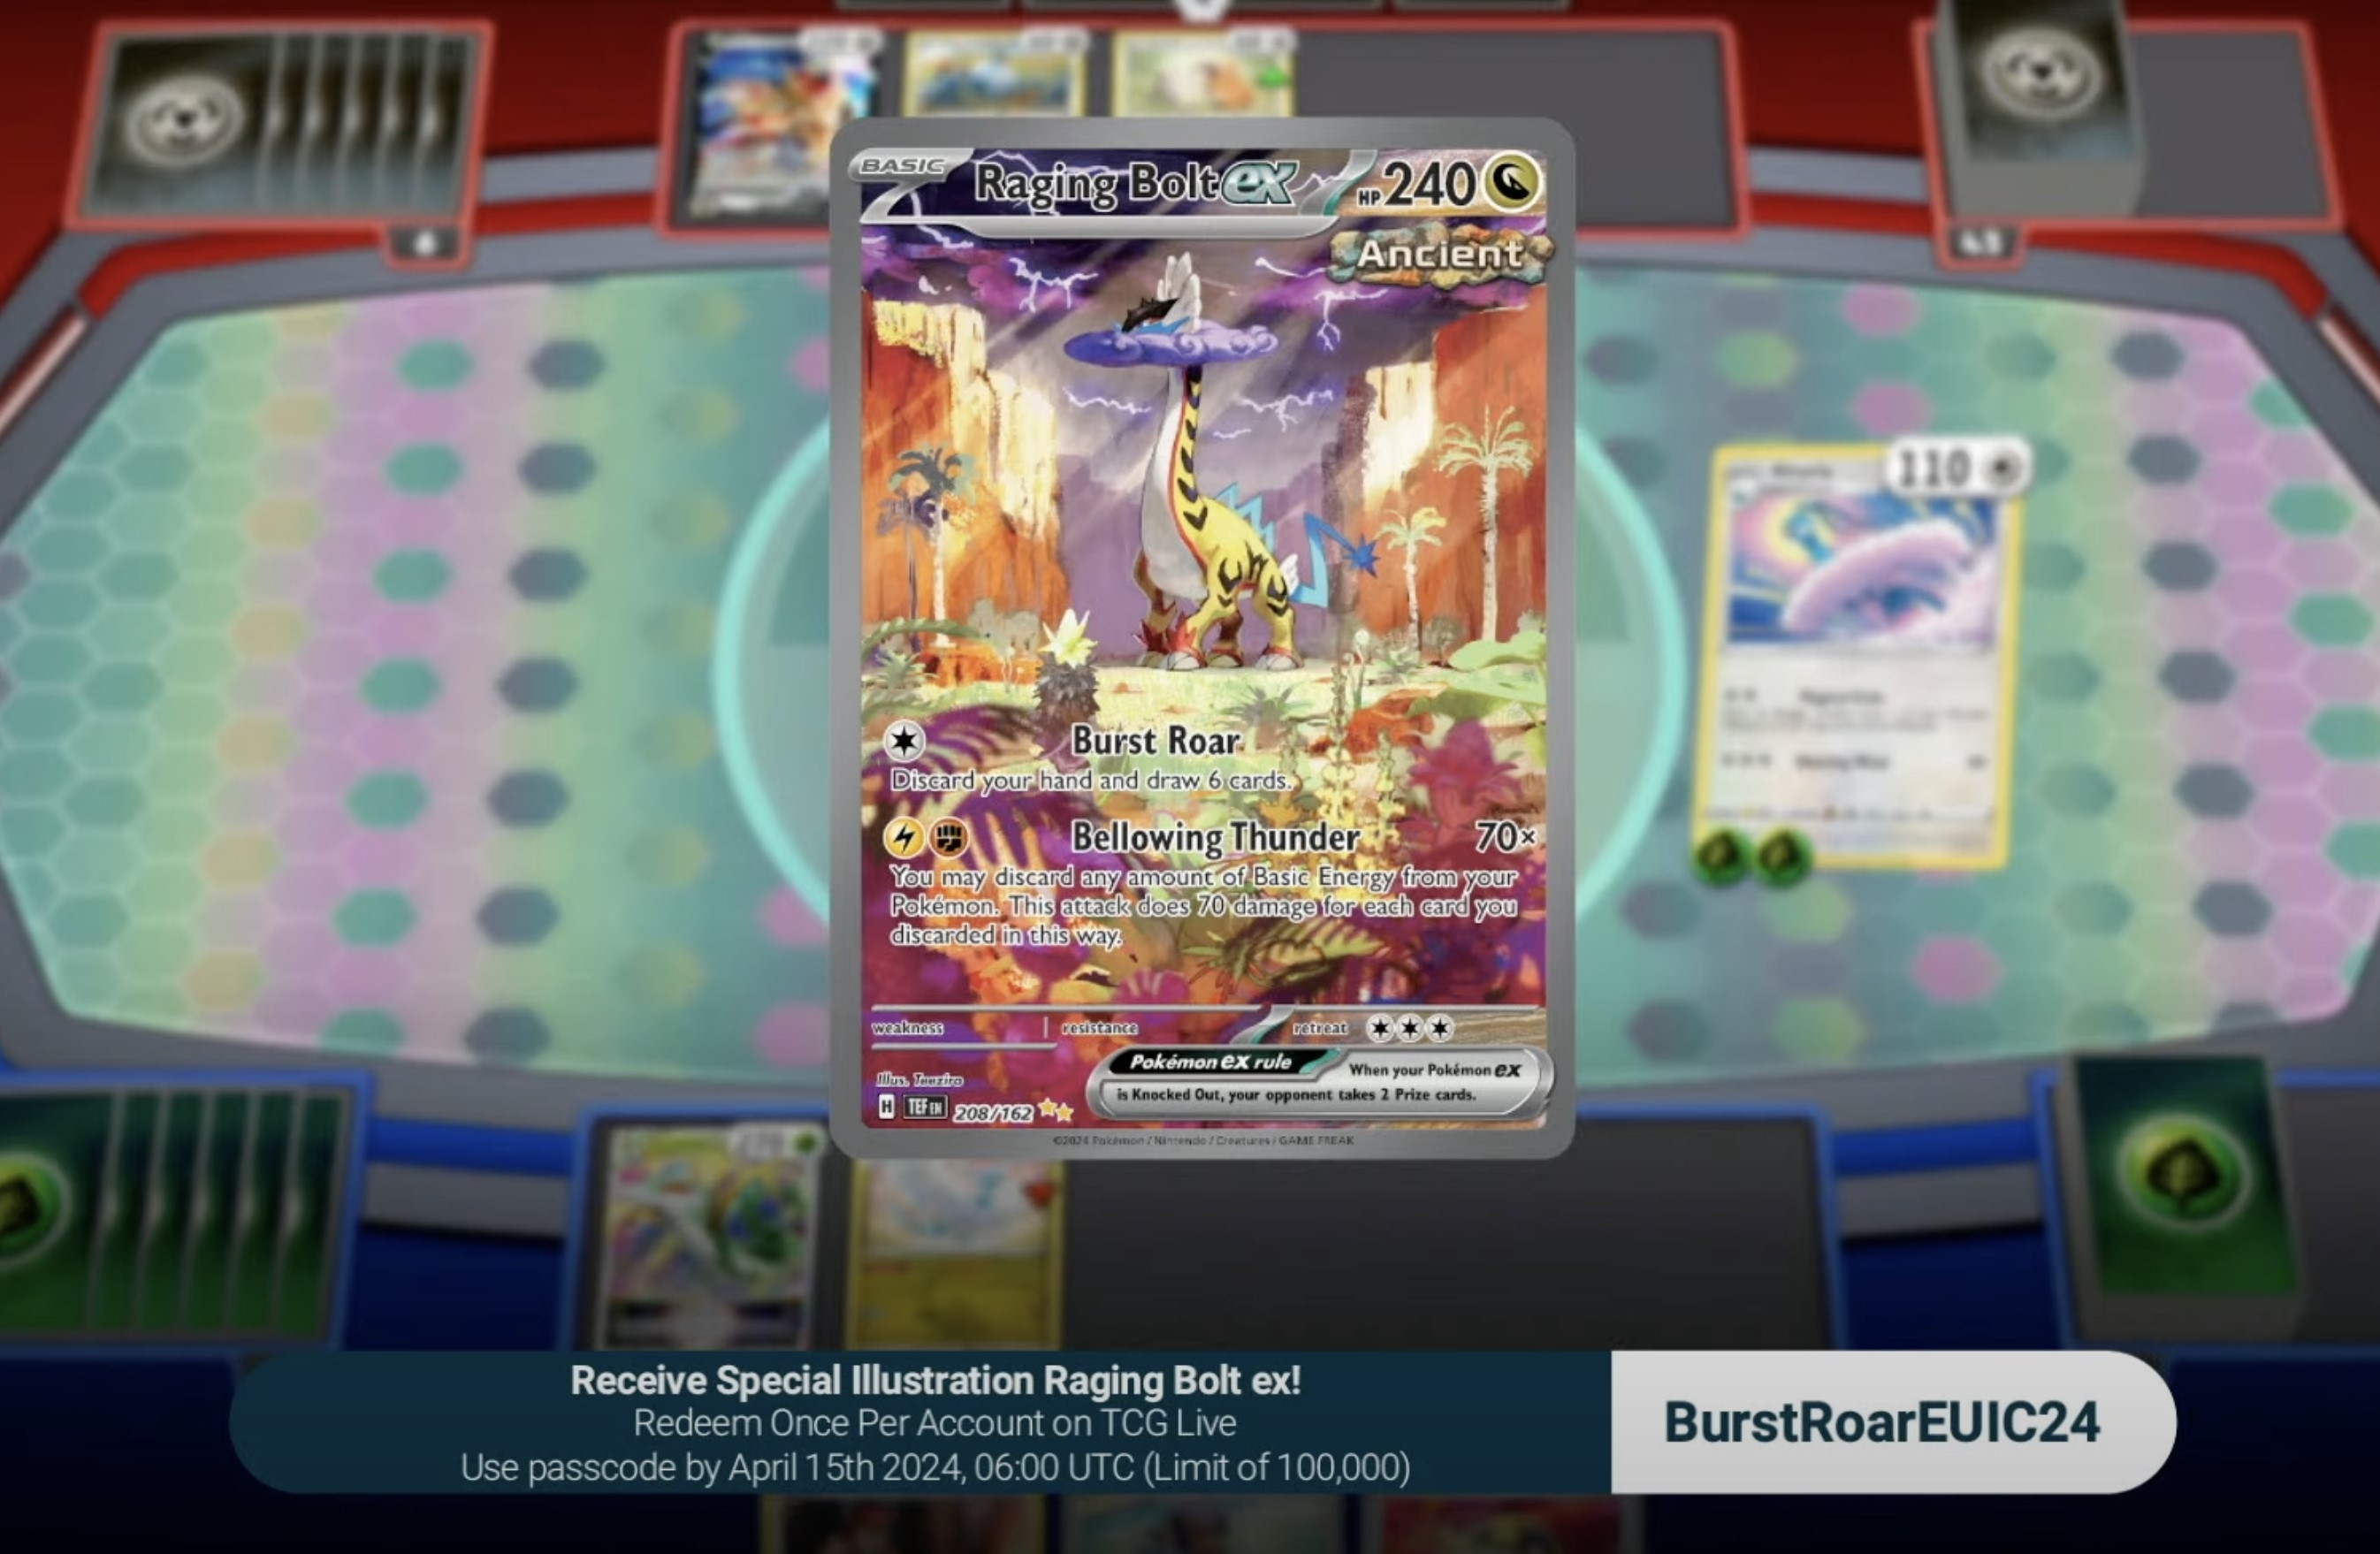 Use code「BurstRoarEUIC24」in the Pokémon Trading Card Live to receive a Special Illustration Rare Raging Bolt ex - code expires April 15th